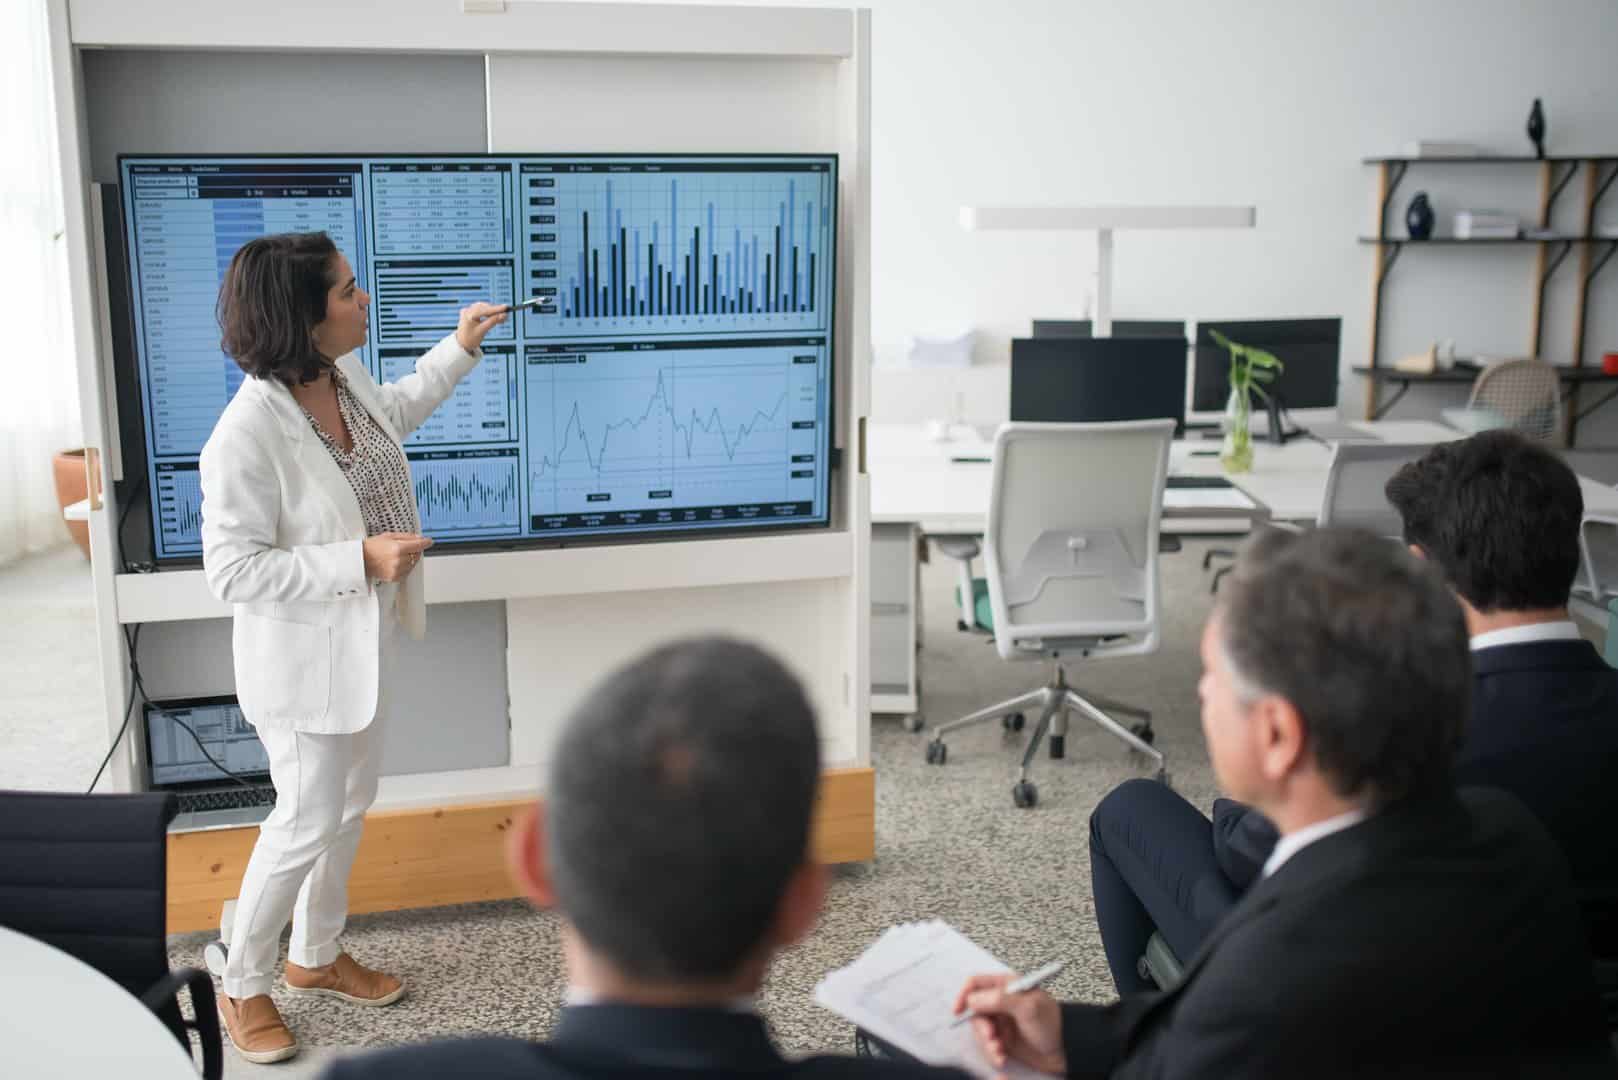 In a board room, a formally dressed woman points at a statistics presentation to the audience in front of her, implying data and certainty.